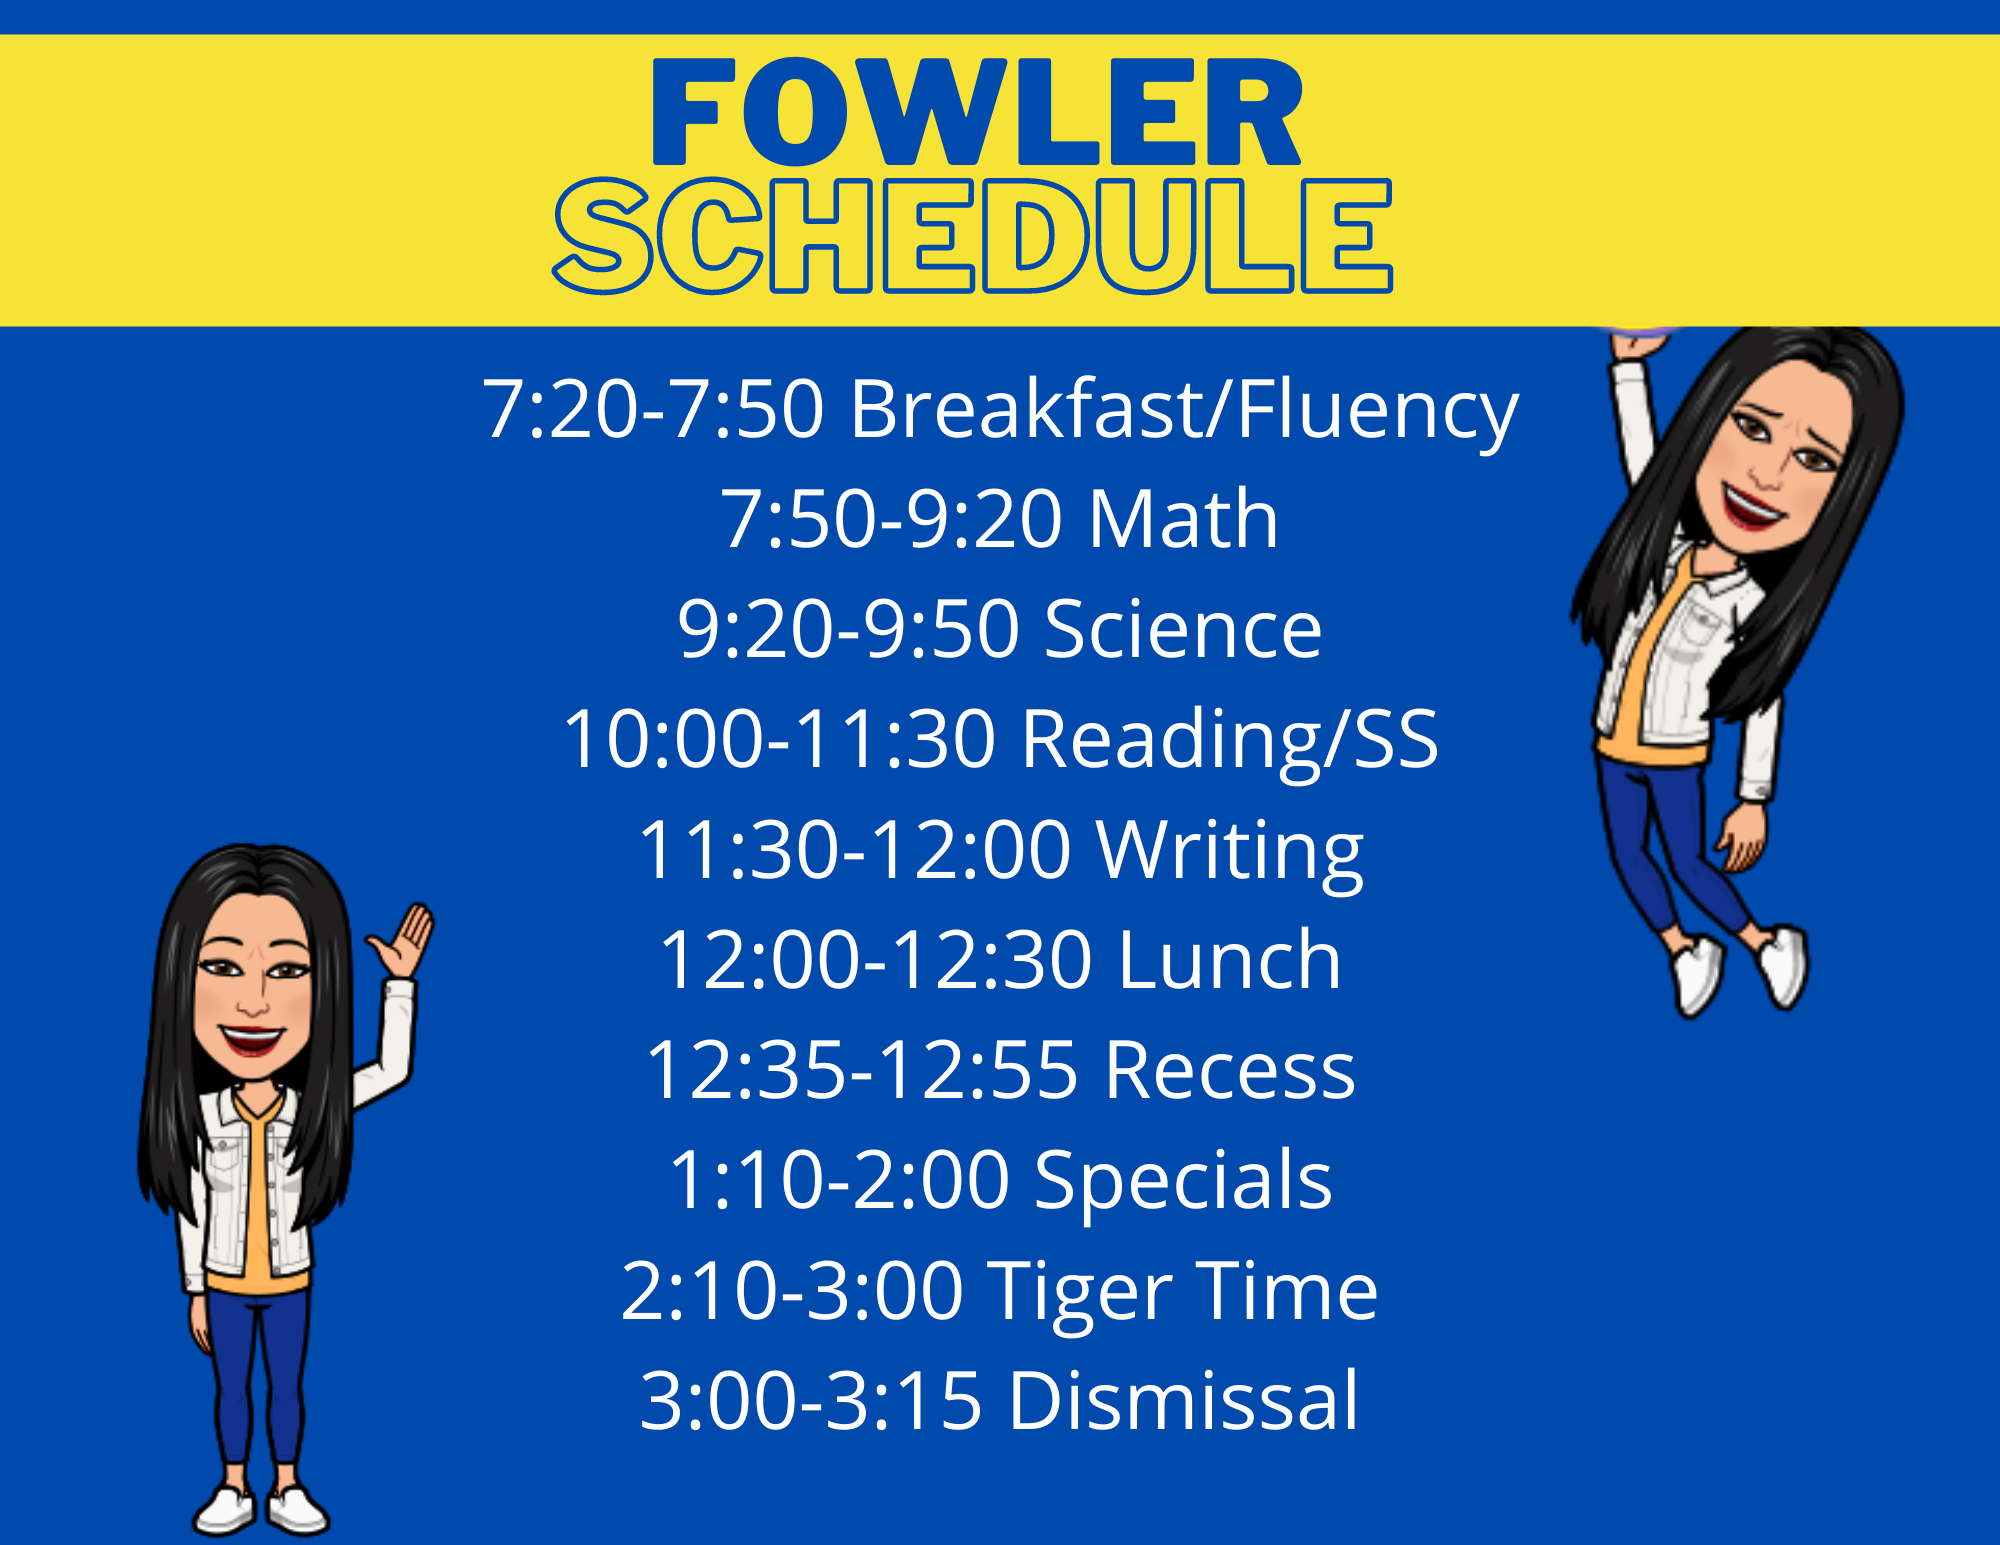 Fowler Schedule.png